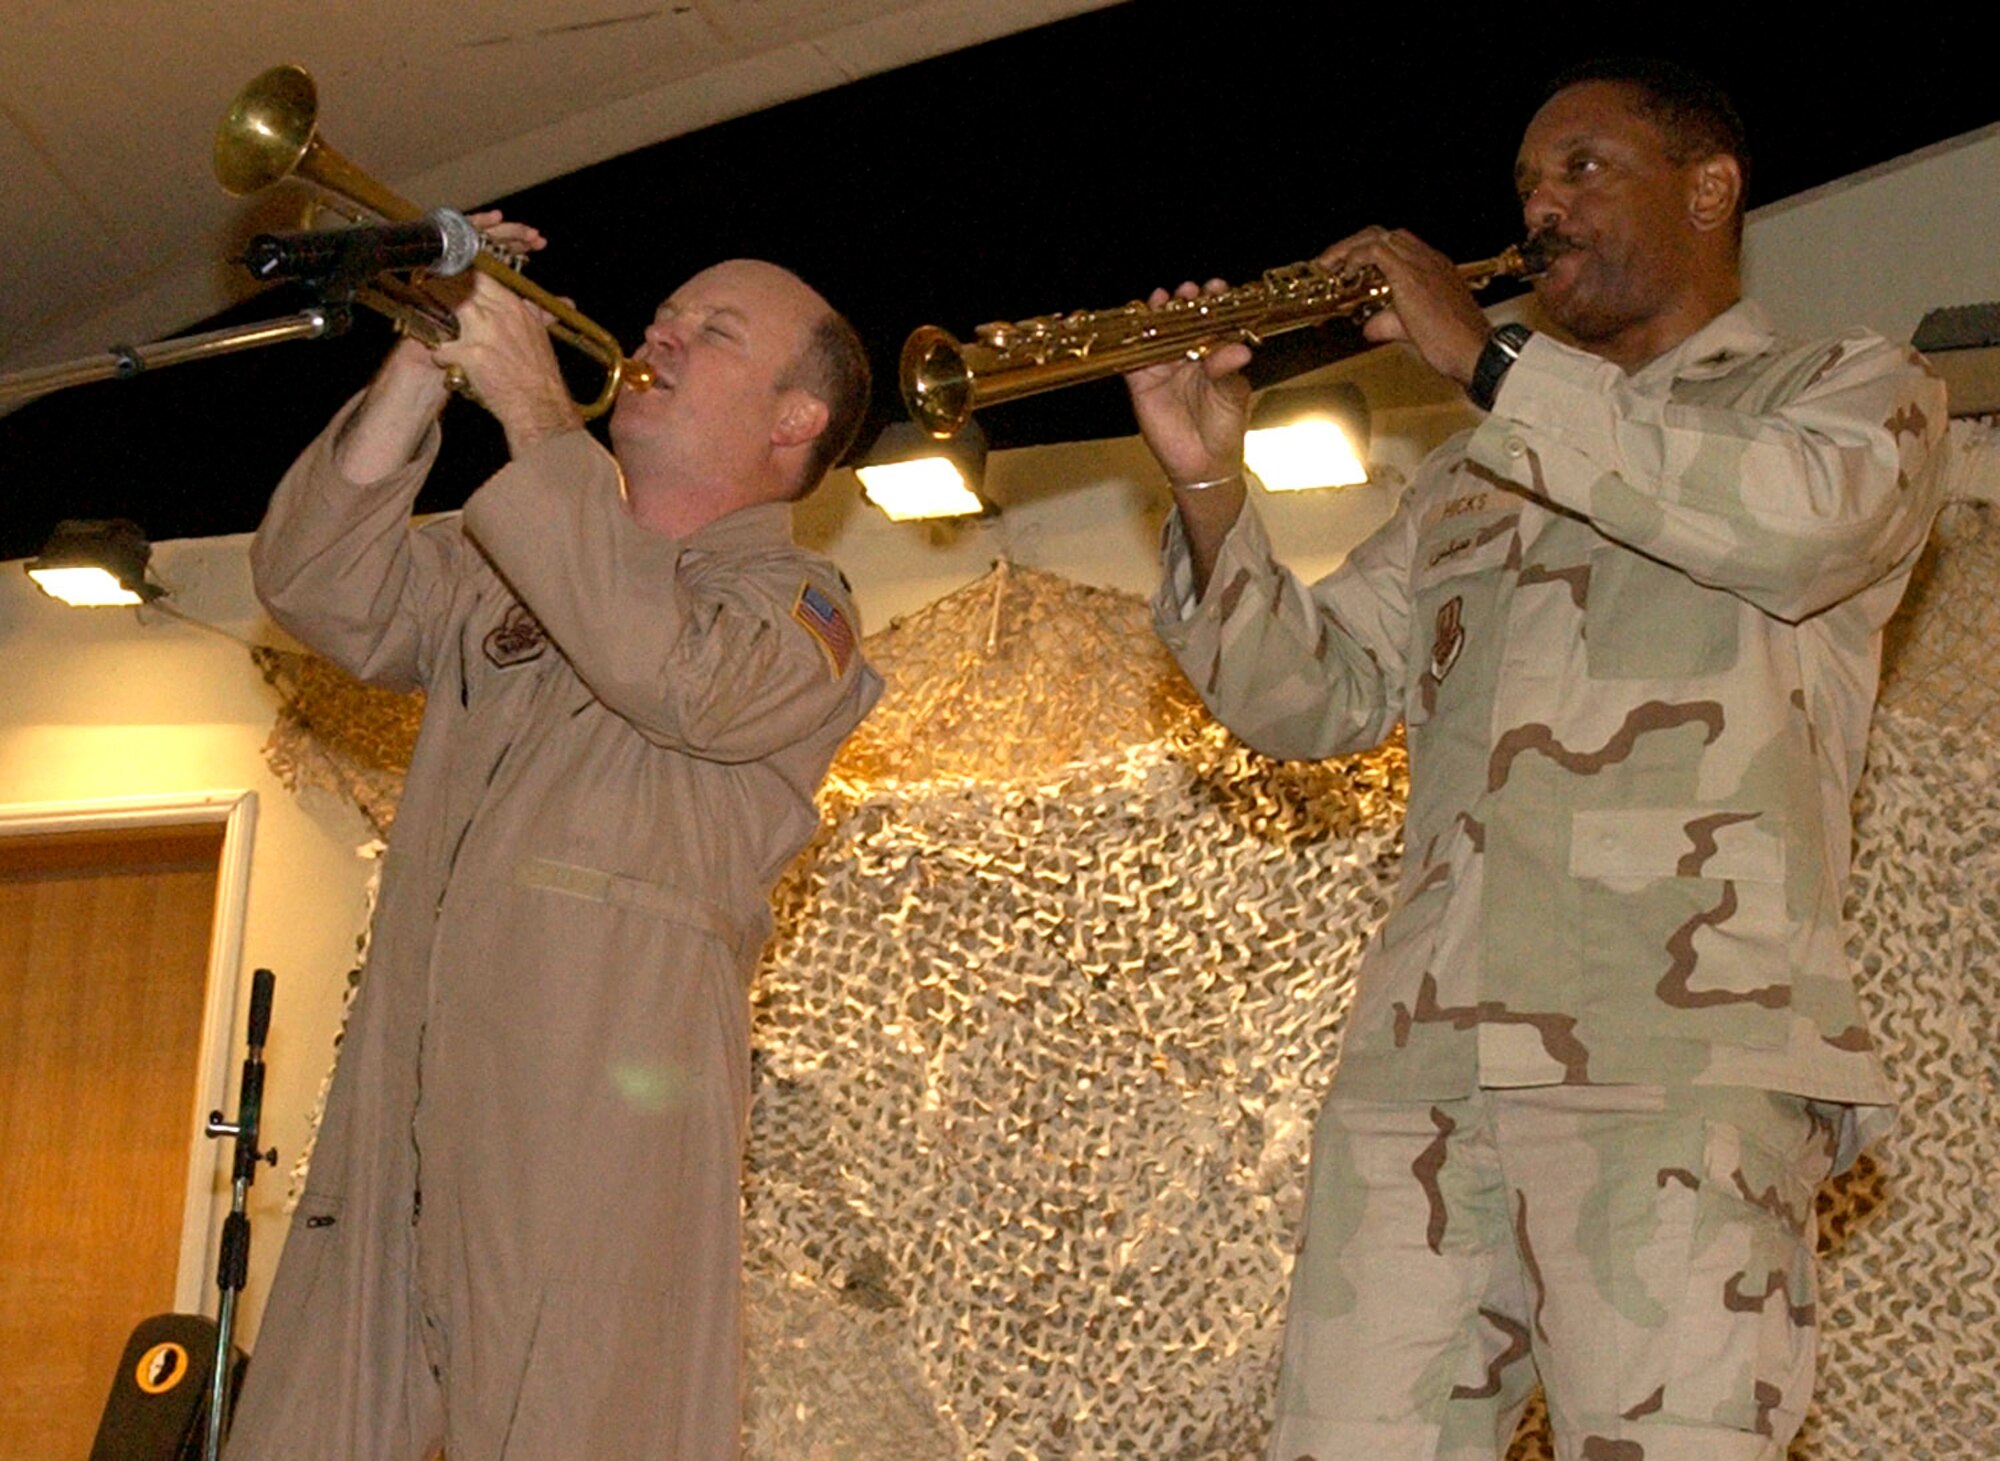 Lt. Col. Brian Reno, on trumpet, duos with Col. Otis Hicks on soprano saxophone, during a talent show at a deployed location in Southwest Asia. They played Led Zeppelin's 'Stairway to Heaven' classic. Colonel Reno is the chief of mobility operations for the Combined Air Operation Center and Colonel Hicks is the civil engineer director. (U.S. Air Force photo/Staff Sgt. Matthew McGovern)